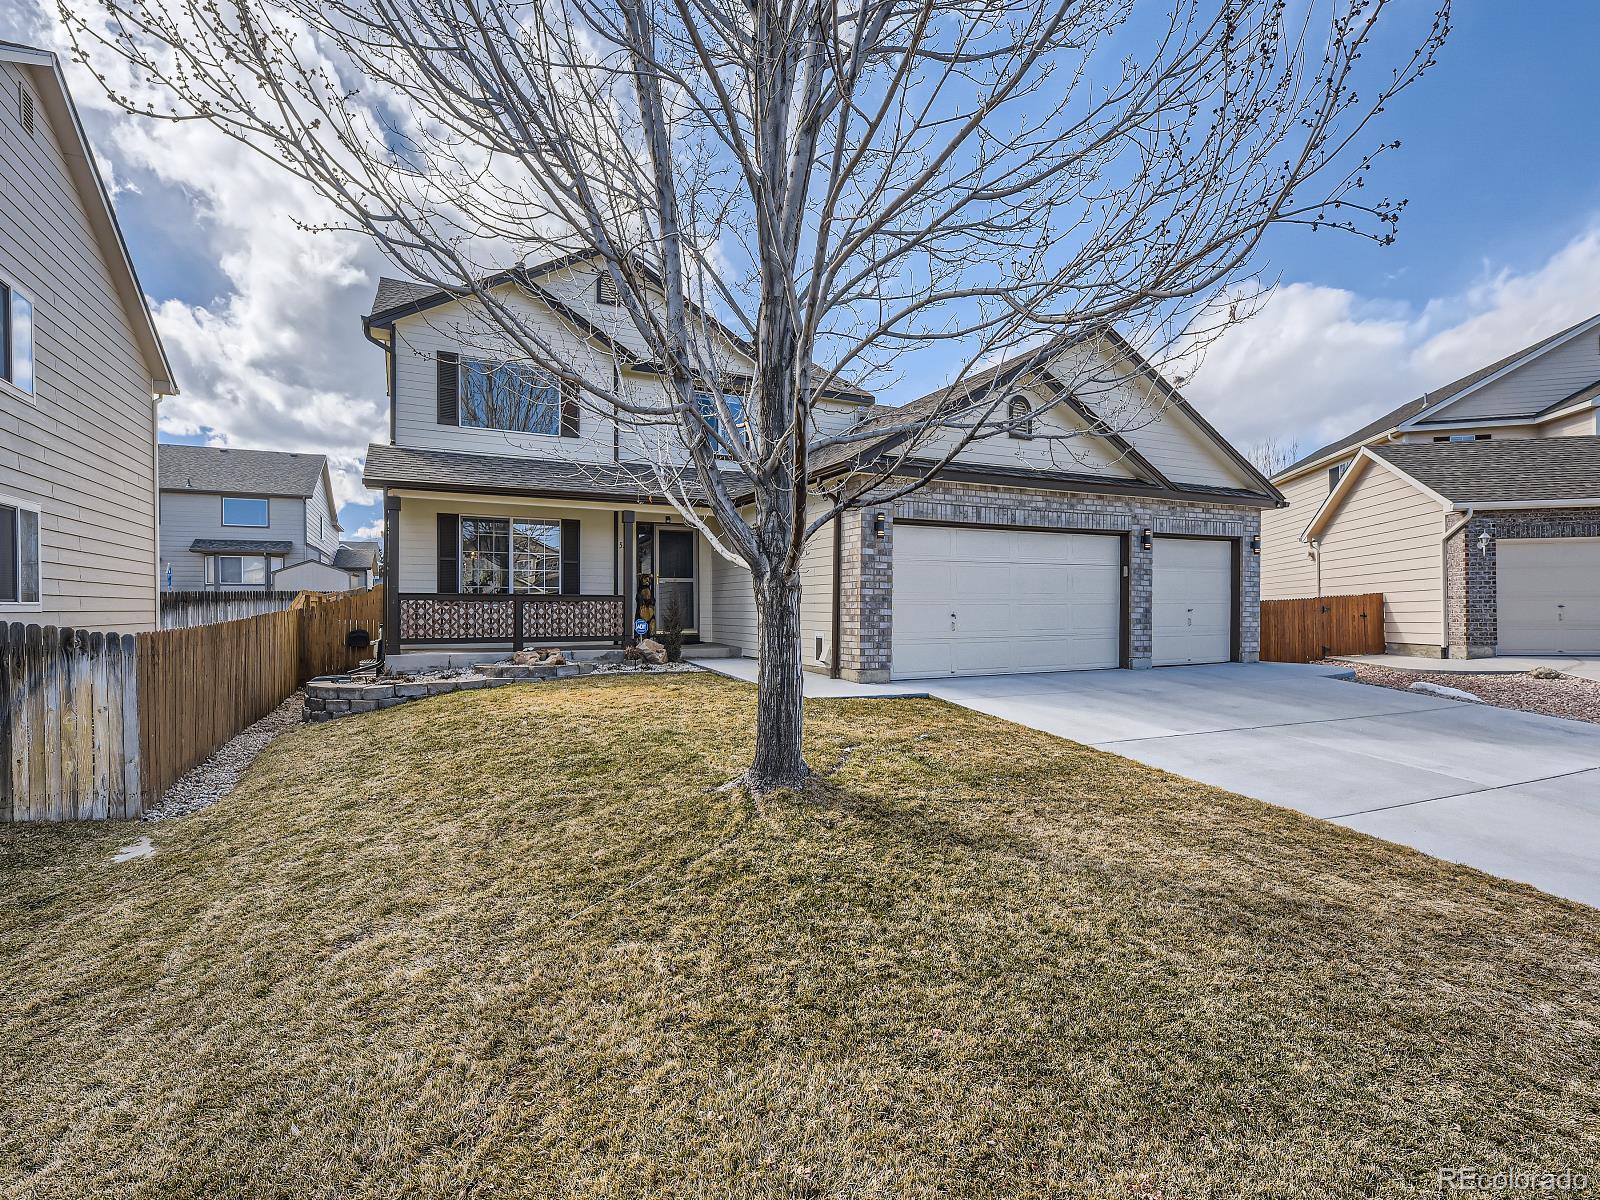 Report Image for 5323 S Robb Court,Littleton, Colorado